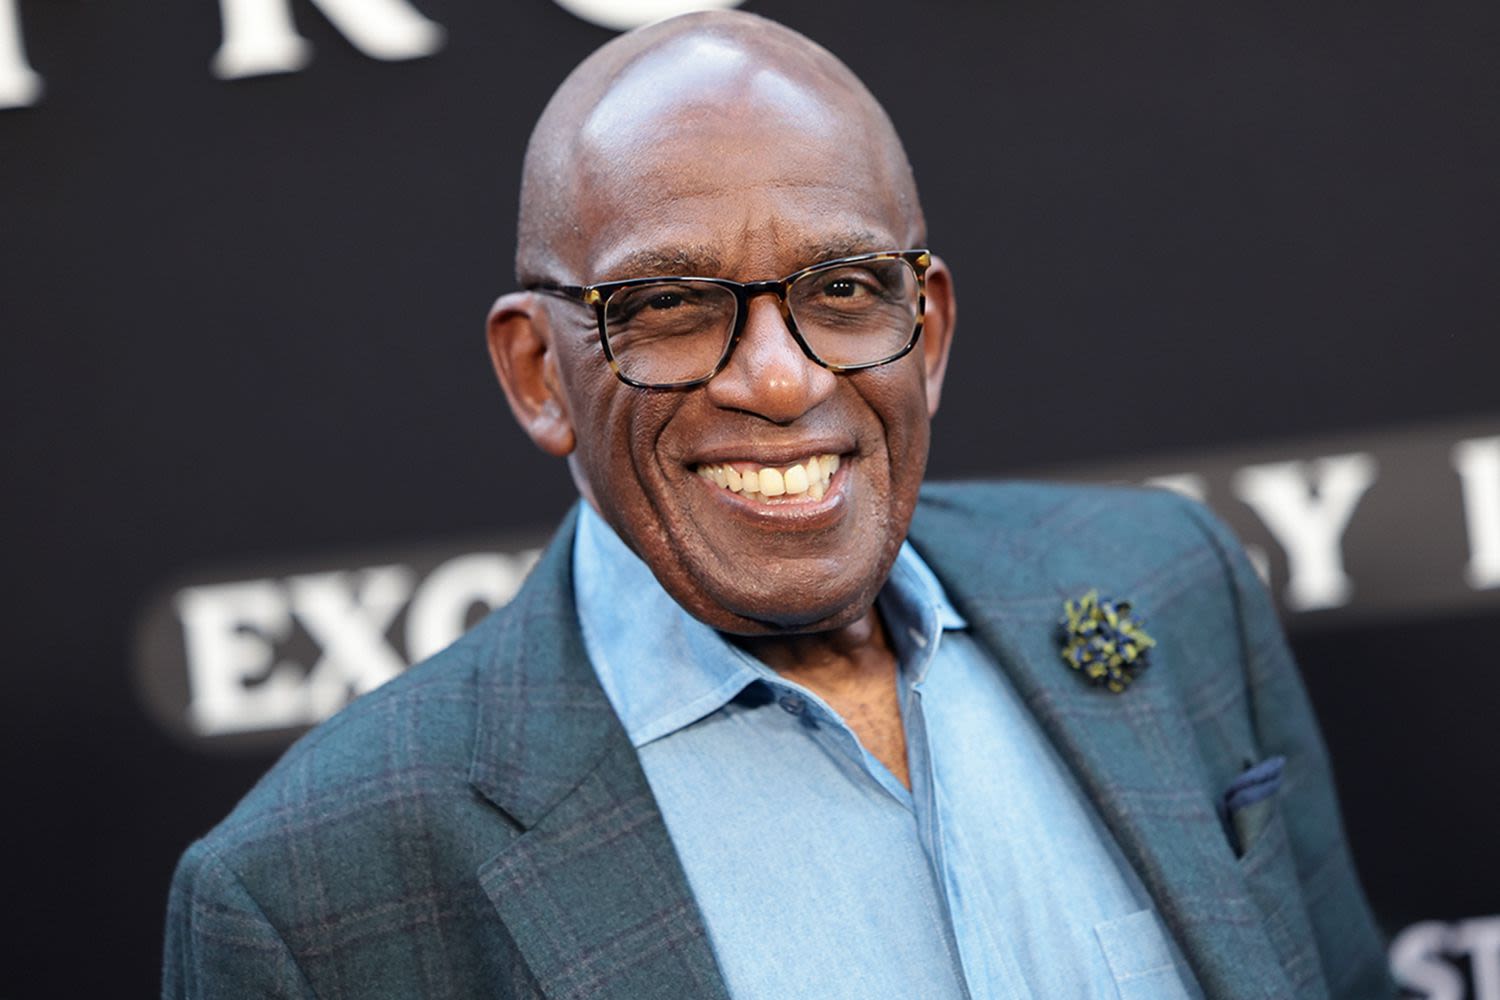 Al Roker Reunites with Family Whose Newborn Appeared with Him on 'Today' 30 Years Ago: It's 'Really Special'